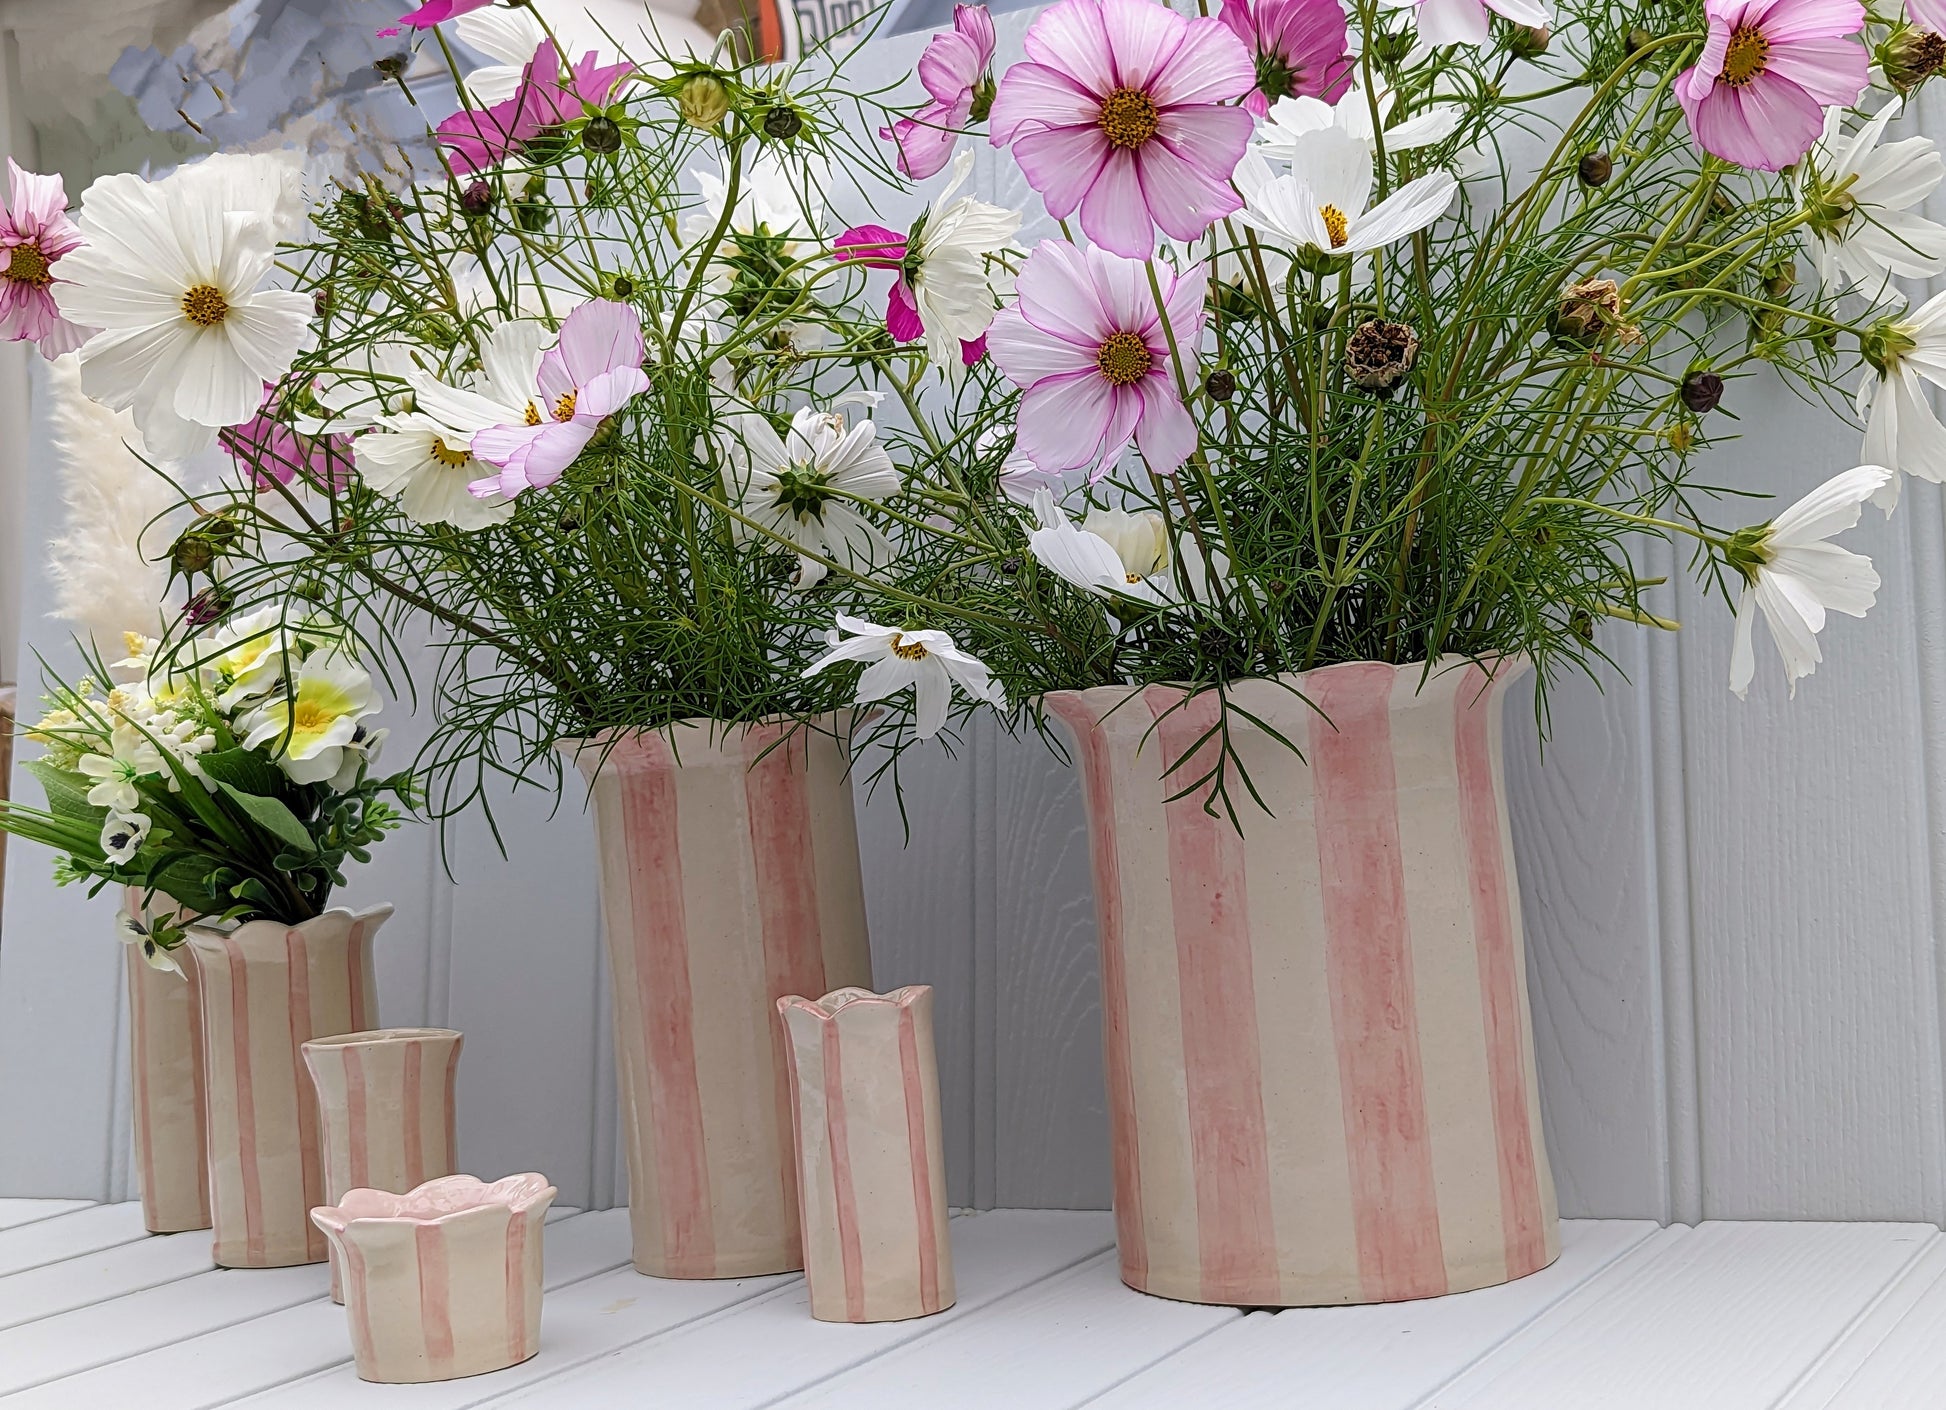 Sea Bramble Ceramics - Handmade, Extra-large, Stoneware vase from their Daisy vase range. With pink stripes and a scalloped top, this vase is ideal for fuller, larger flower arrangements. Shown from right to left are a Sea Bramble Ceramics Extra Large Daisy vase, a Short Sea lavender vase, a Large Daisy vase, a Tealight holder, Sweet Pea vase, The original Daisy vase & lastly the Tall Sea lavender vase.